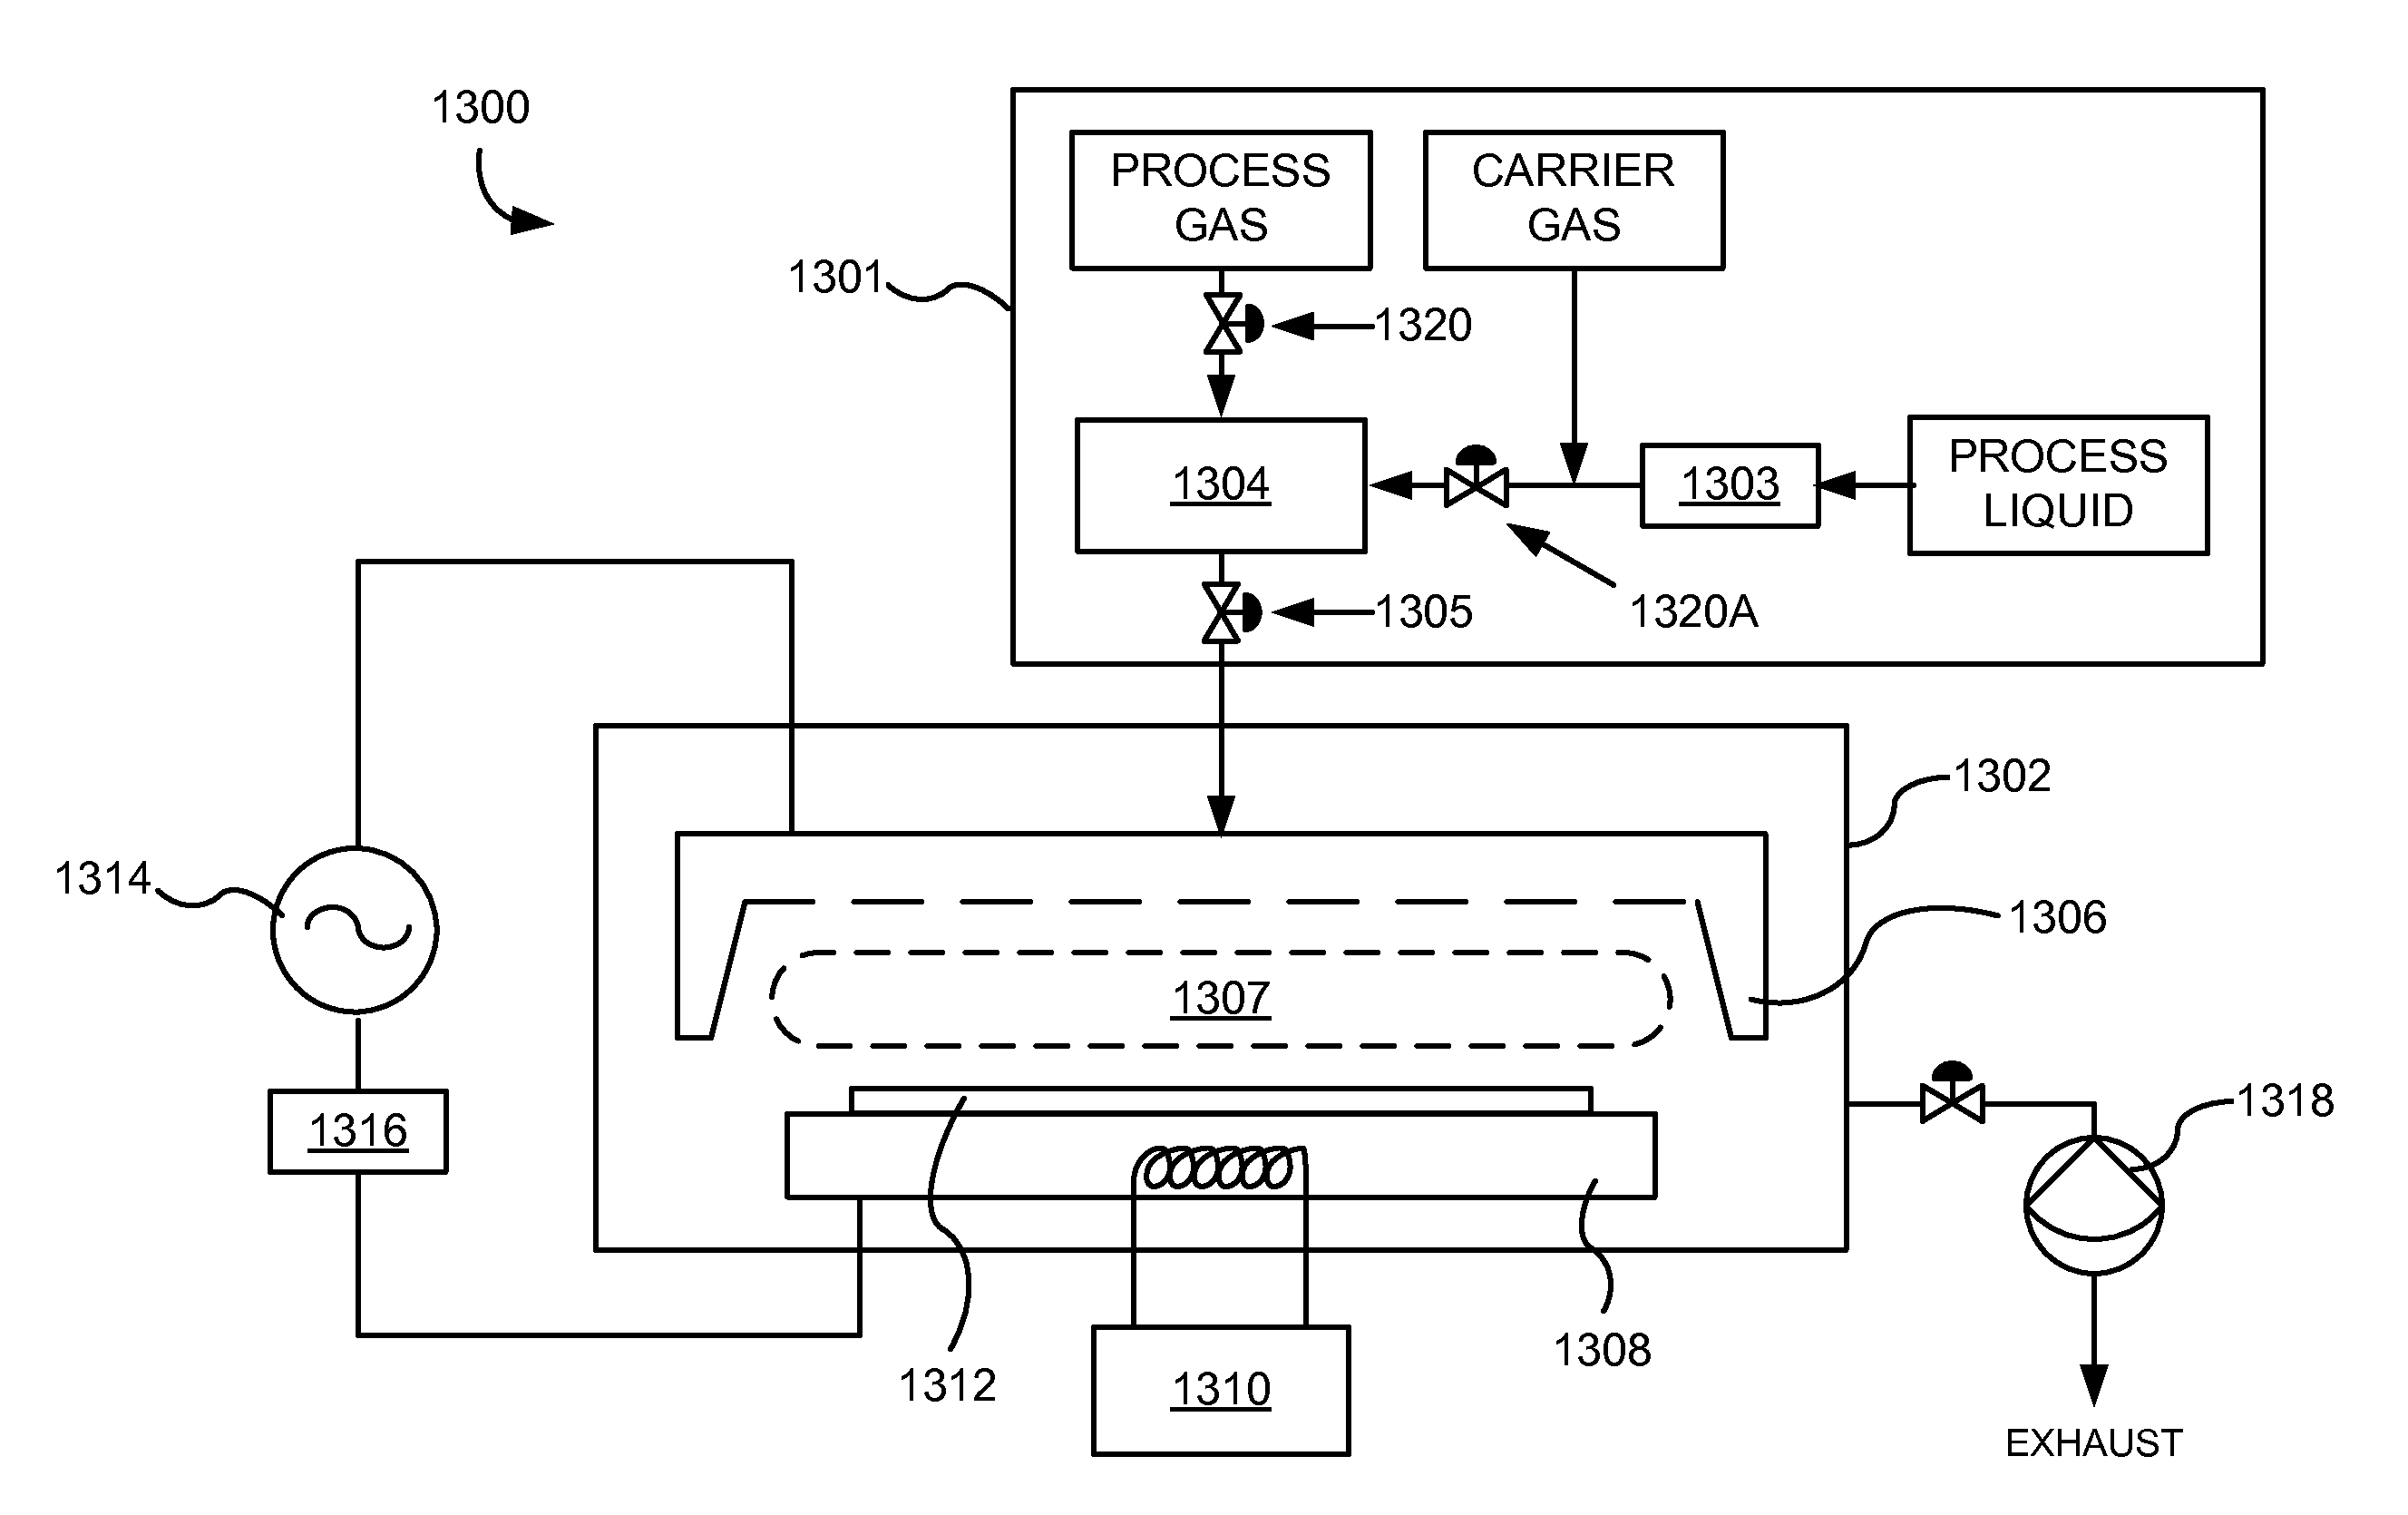 Silicon nitride films and methods